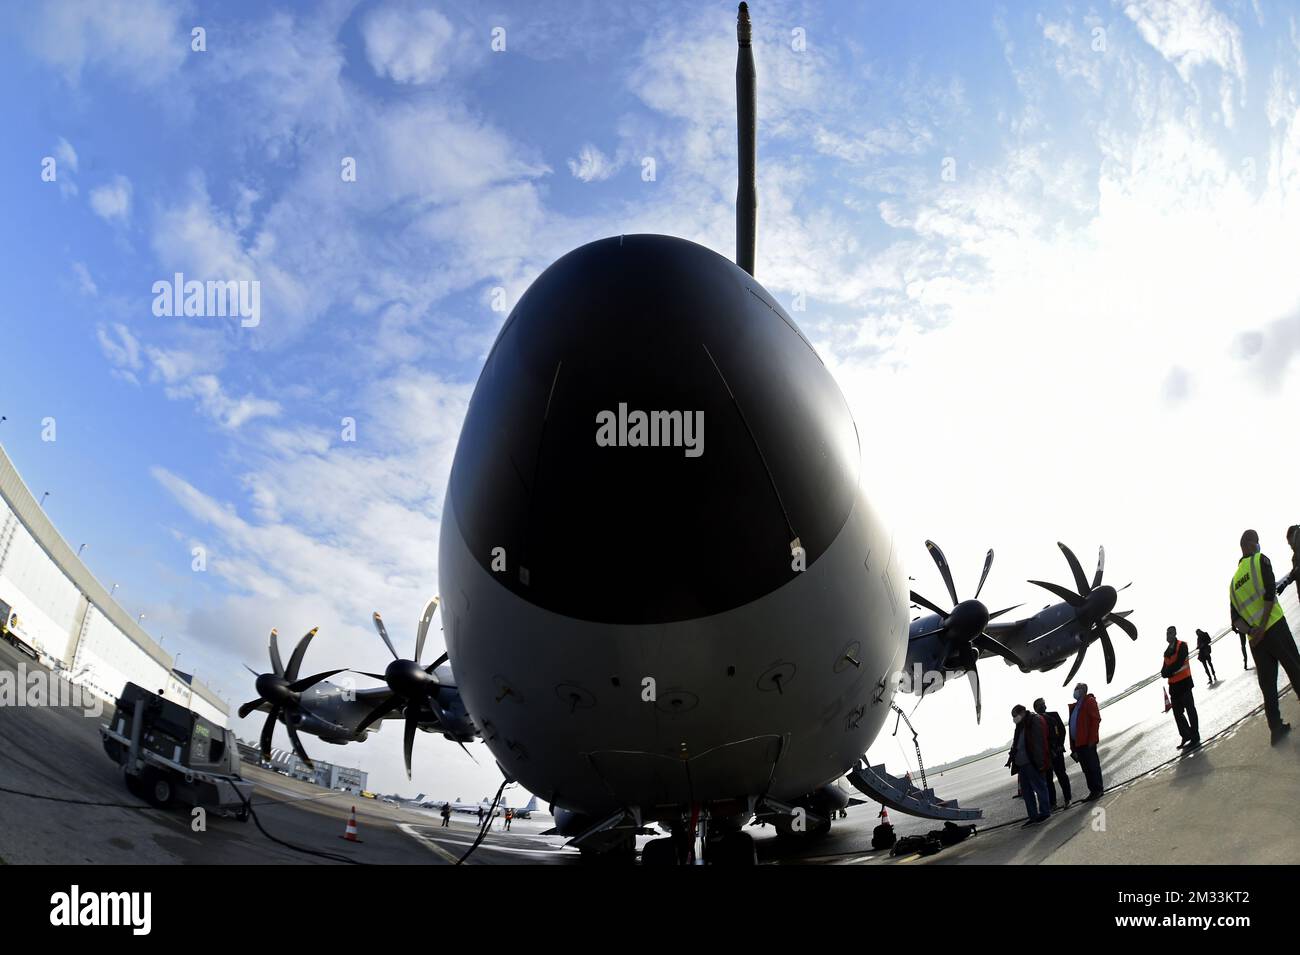 Illustration shows a ceremony for the arrival of the first plane of the A400M model for the 15th Wing of the bi-national unit Belgian-Luxembourg, which will be based at the military airport in Melsbroek, Steenokkerzeel, Friday 09 October 2020. BELGA PHOTO POOL DIDIER LEBRUN  Stock Photo